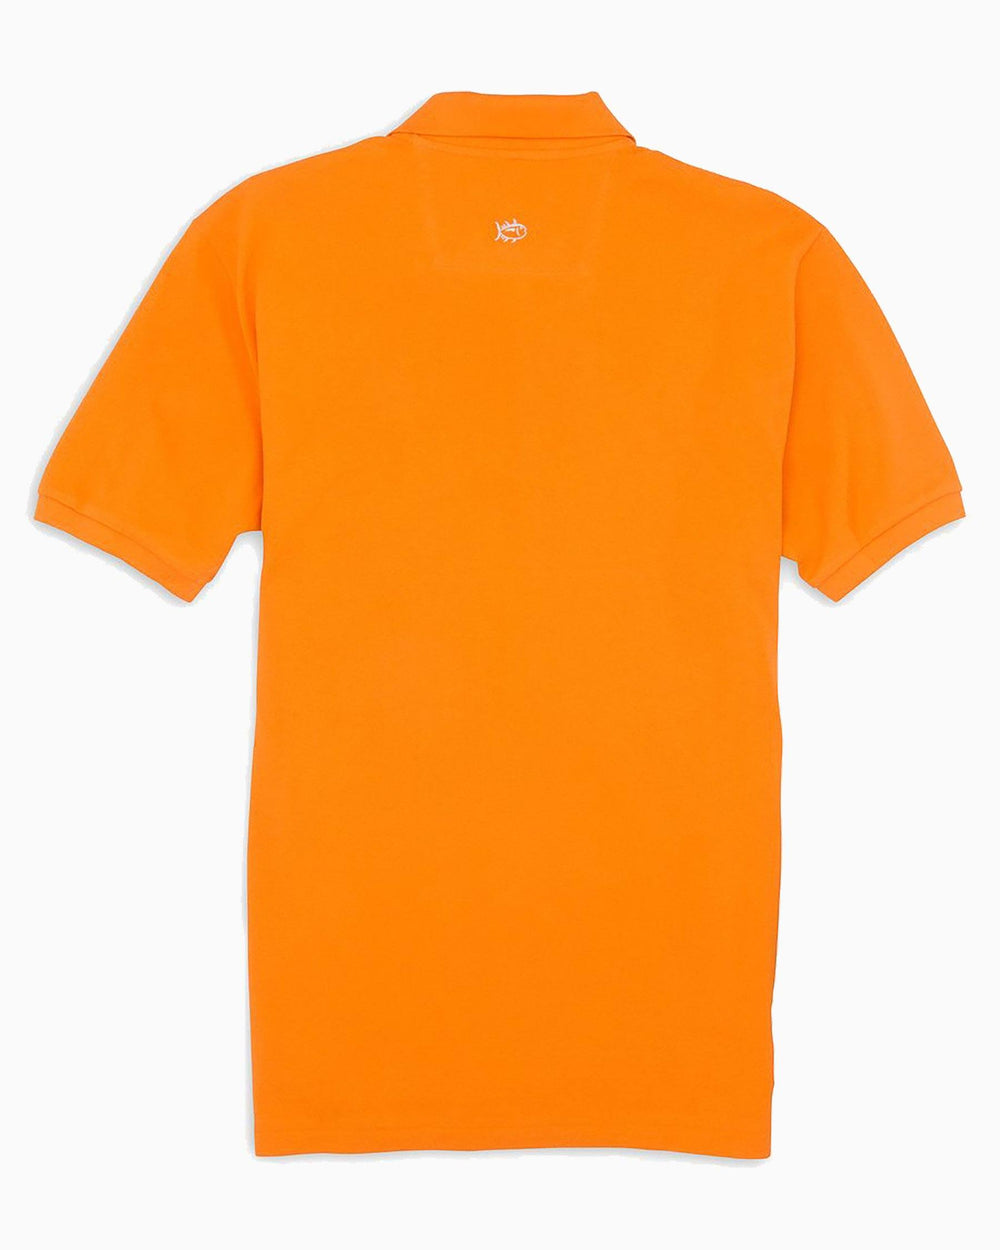 The back view of the Men's Orange Tennessee Vols Pique Polo Shirt by Southern Tide - Rocky Top Orange